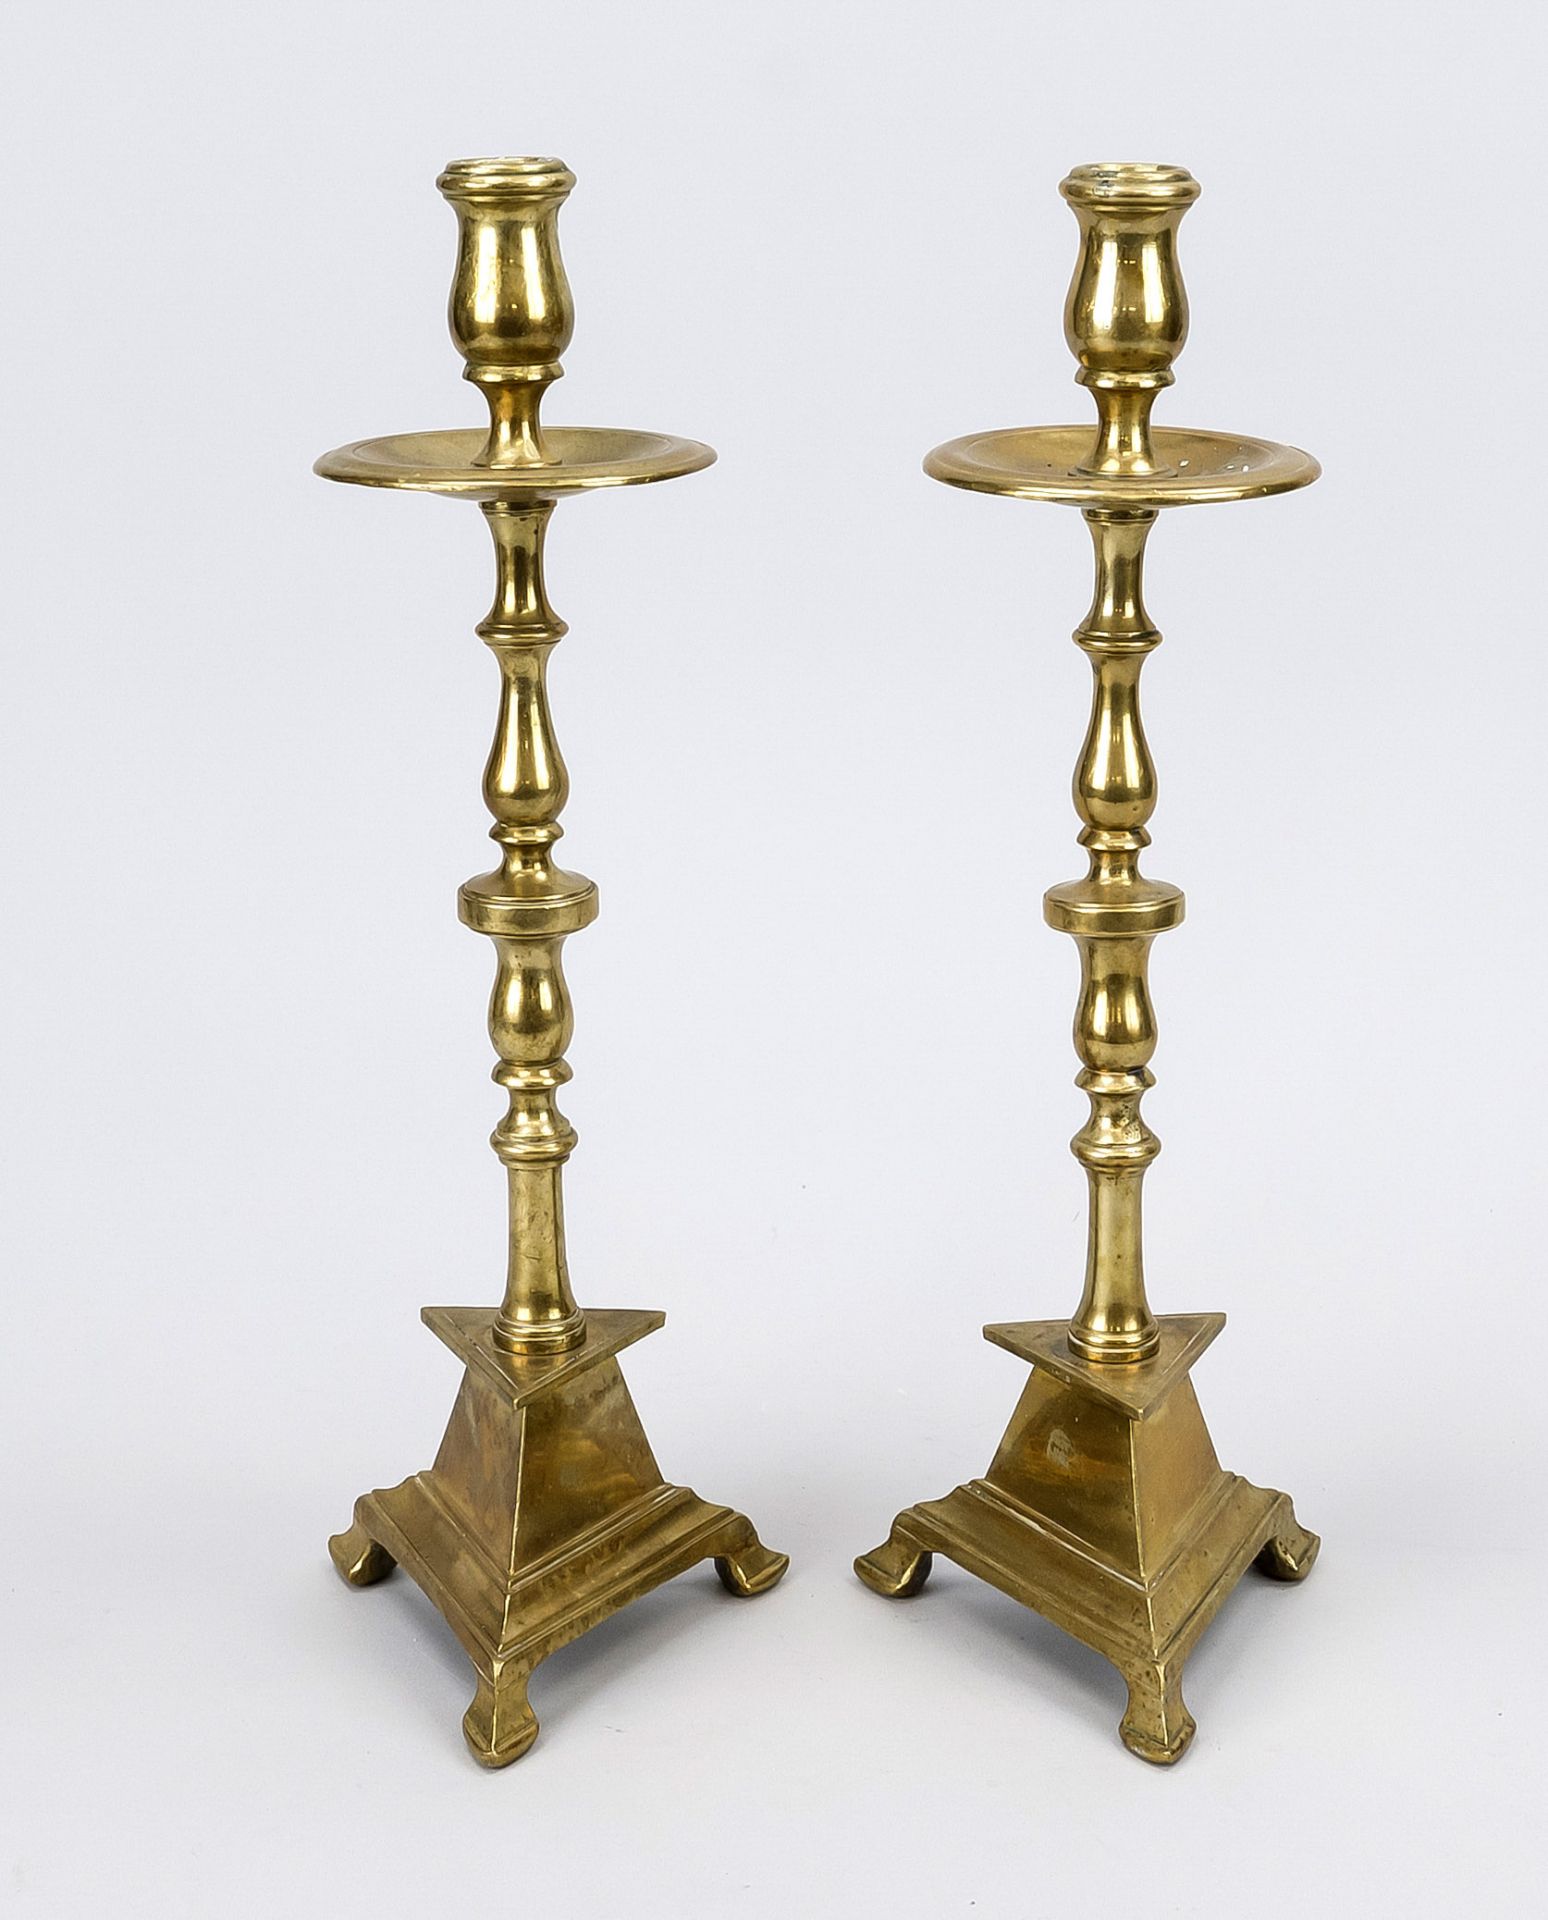 Pair of altar candlesticks, 18th/19th century, brass. Baluster shaft, triangular foot with stepped